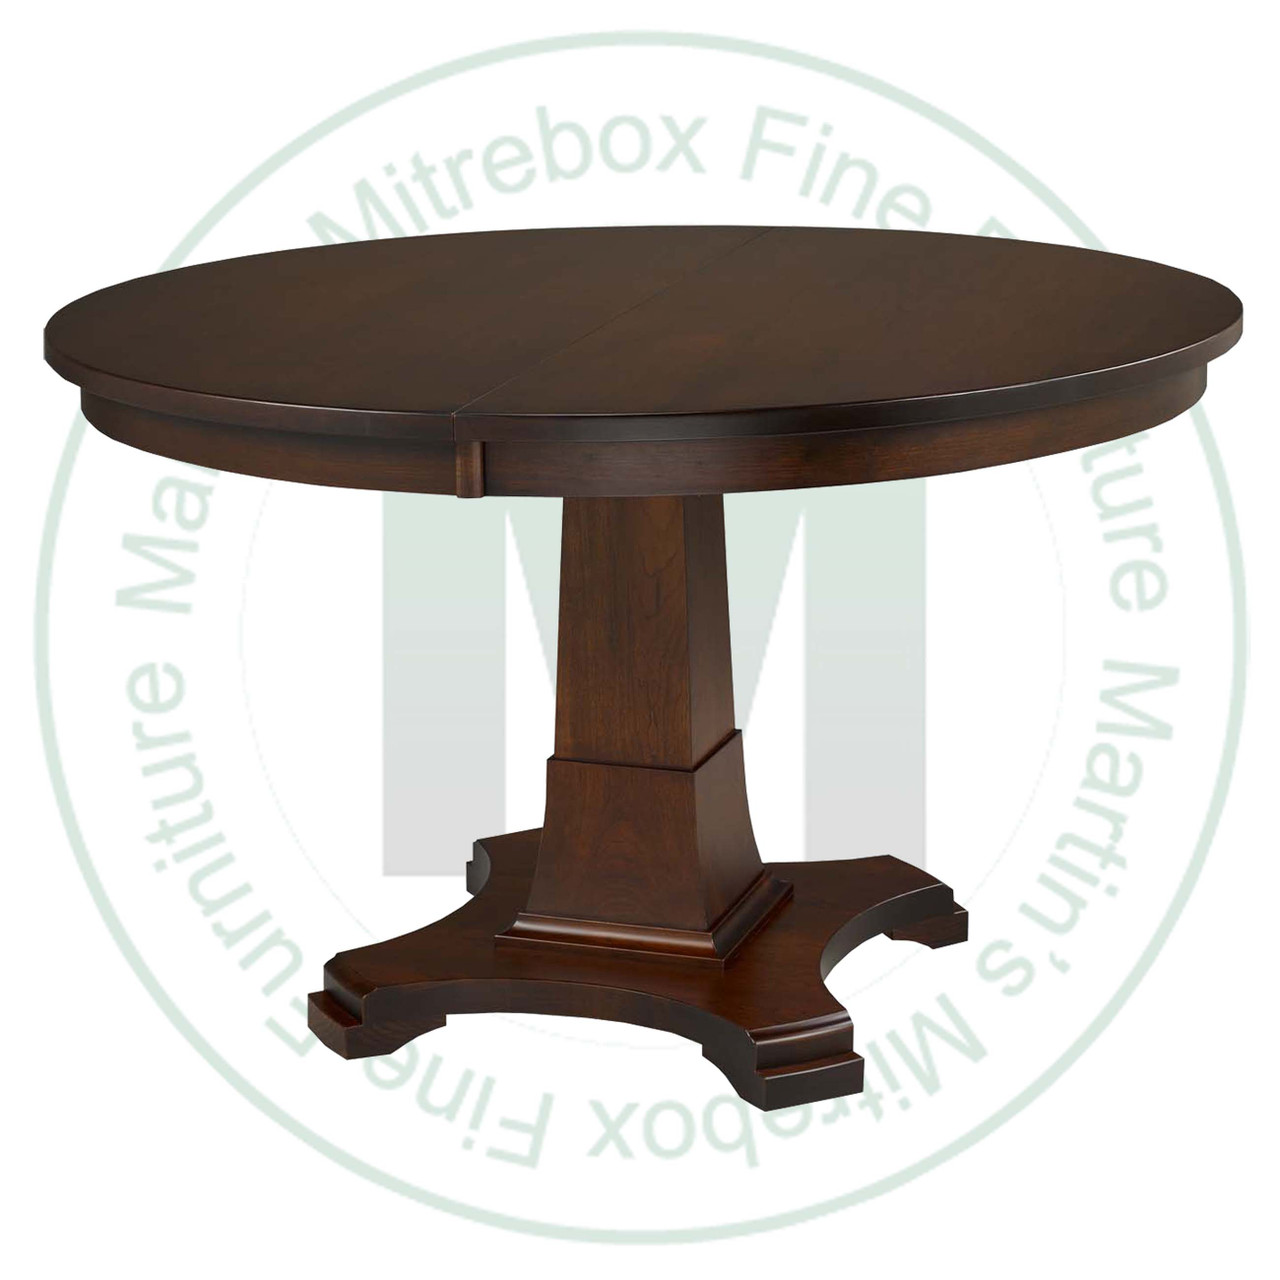 Oak Abbey Single Pedestal Table 60''D x 60''W x 30''H With 2 - 12'' Leaves. Table Has 1.25'' Thick Top